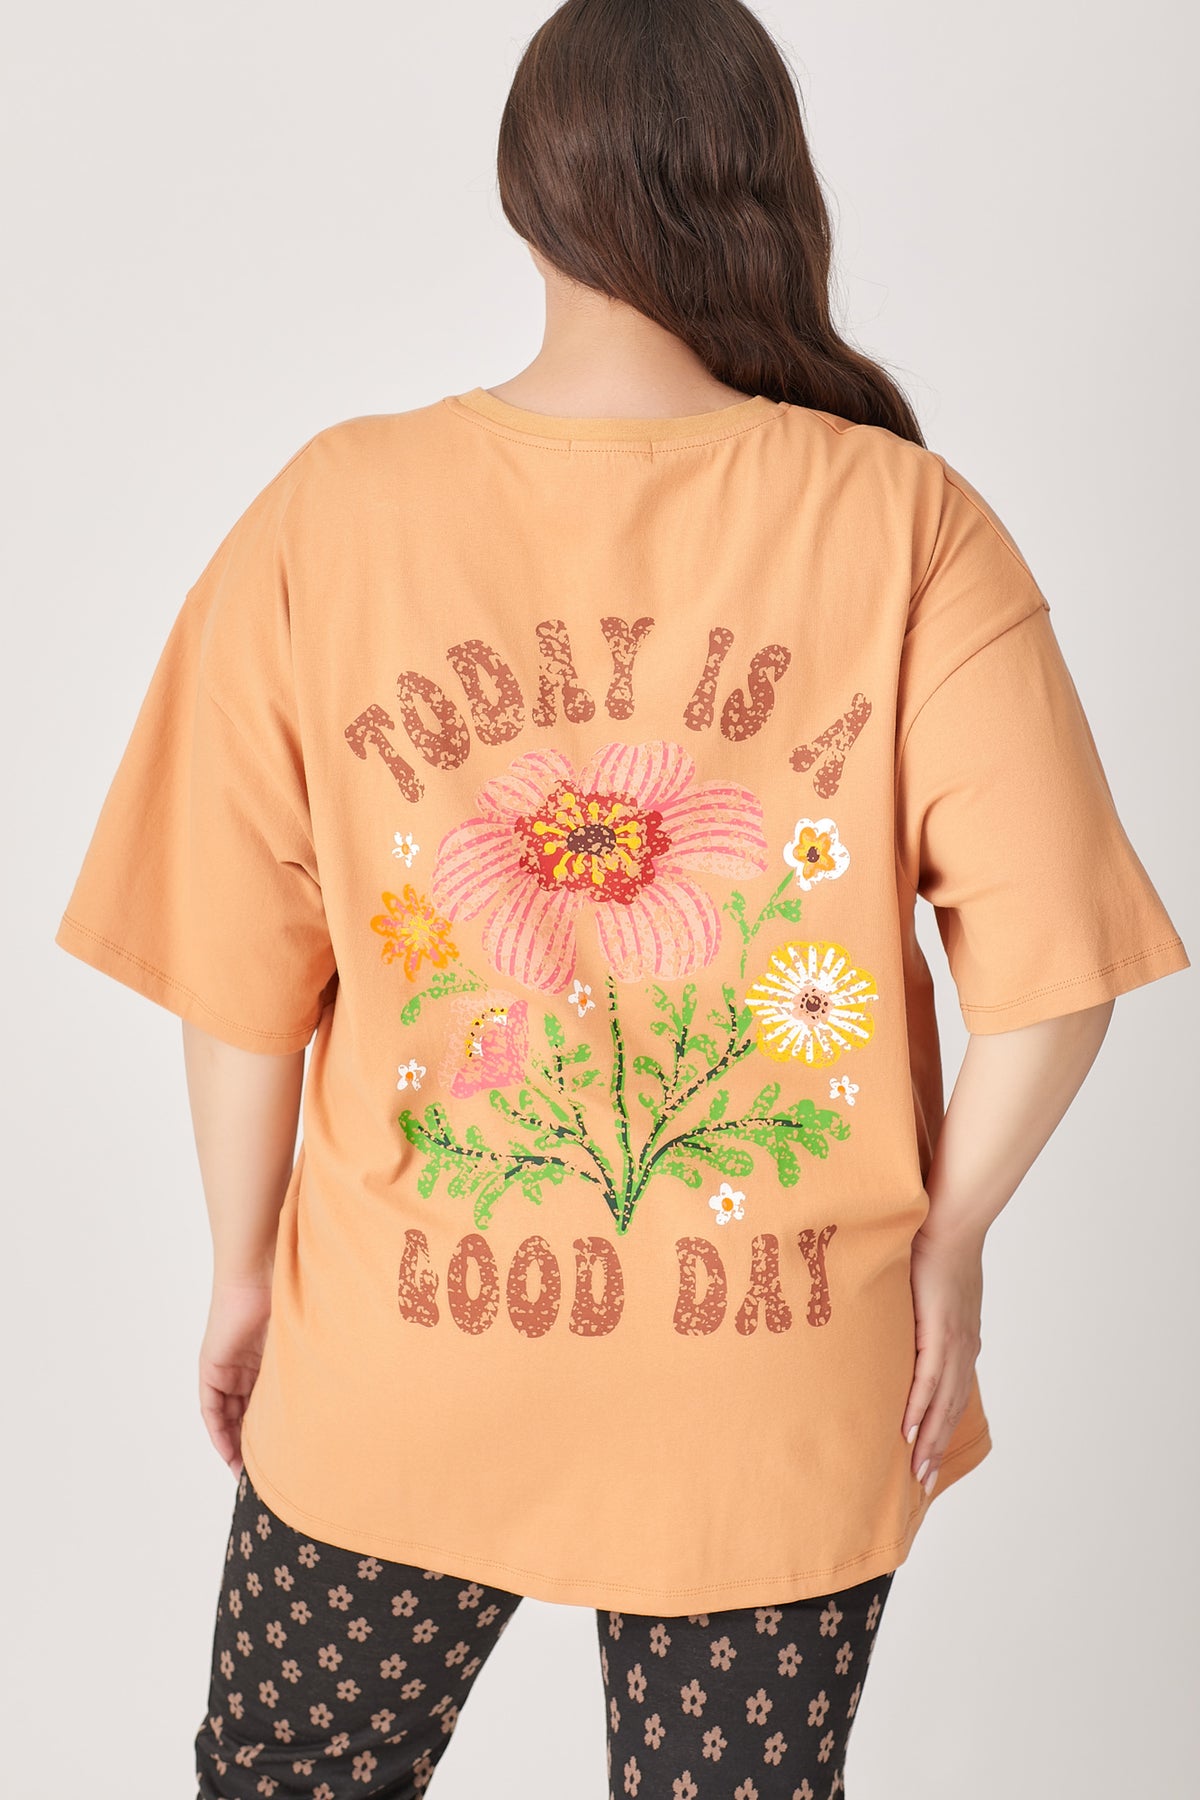 "Today Is A Good Day" Tee - Apricot